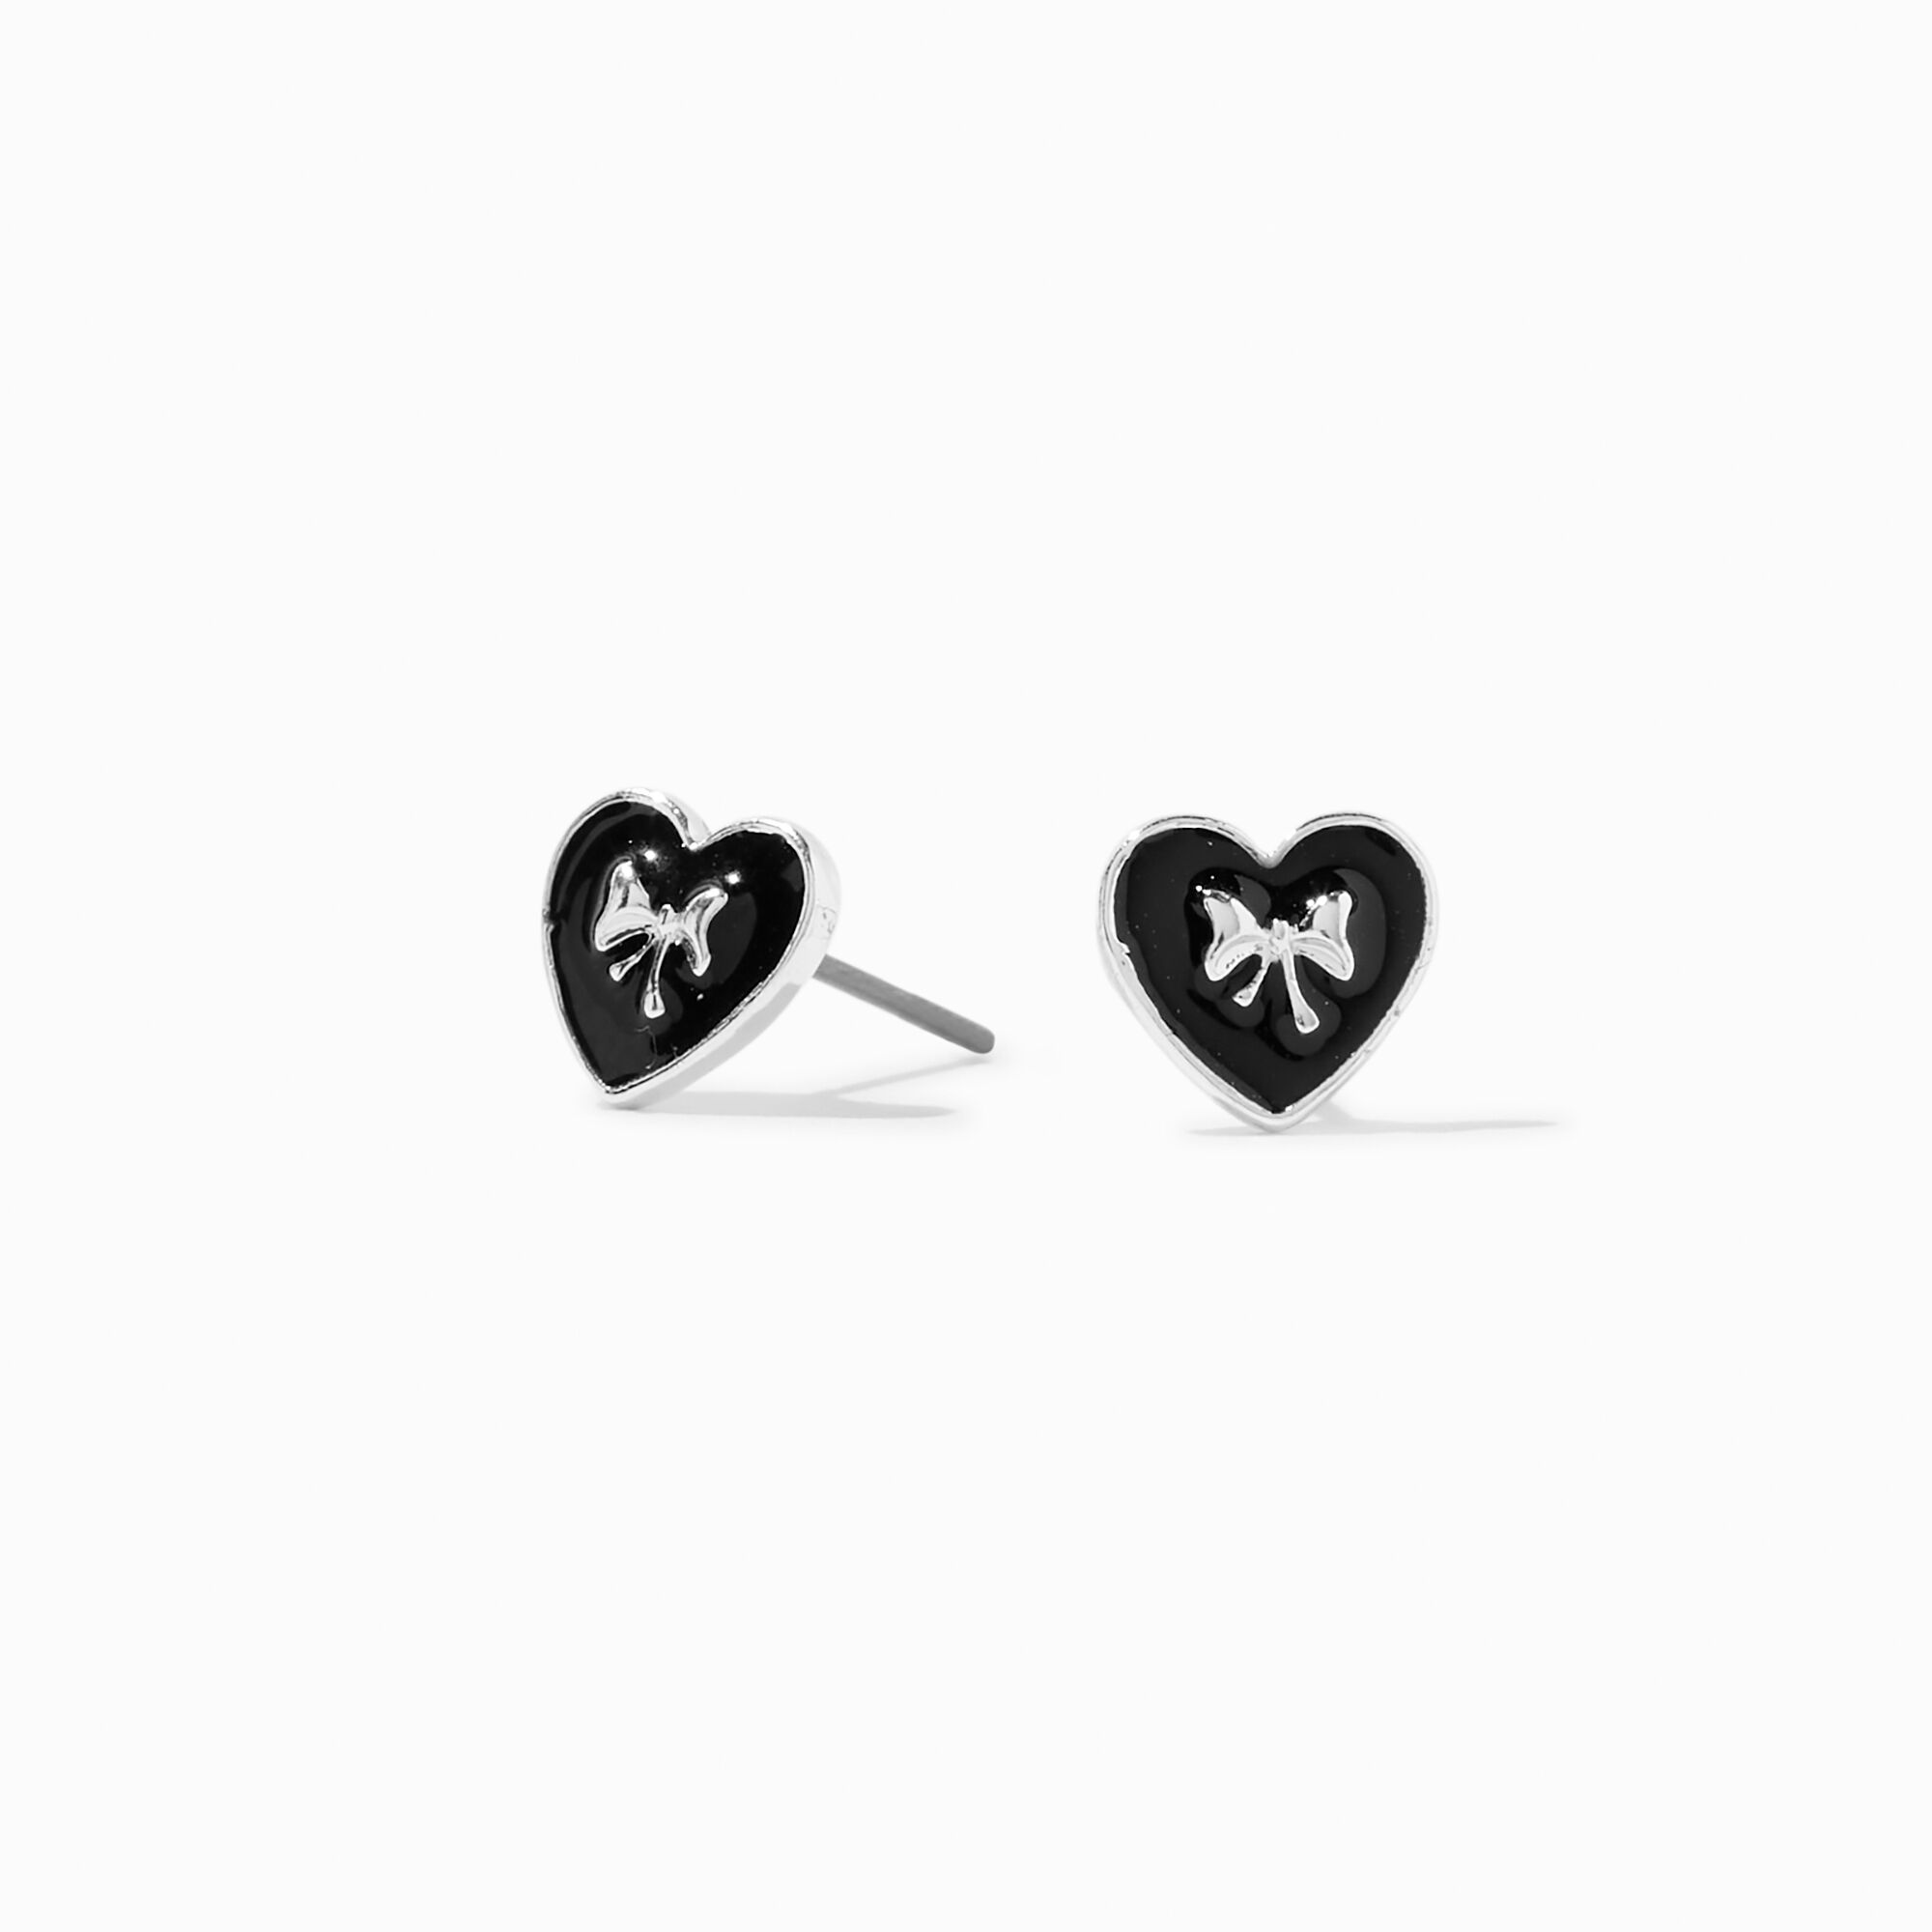 View Claires SilverTone Bow Heart Stud Earrings Black information